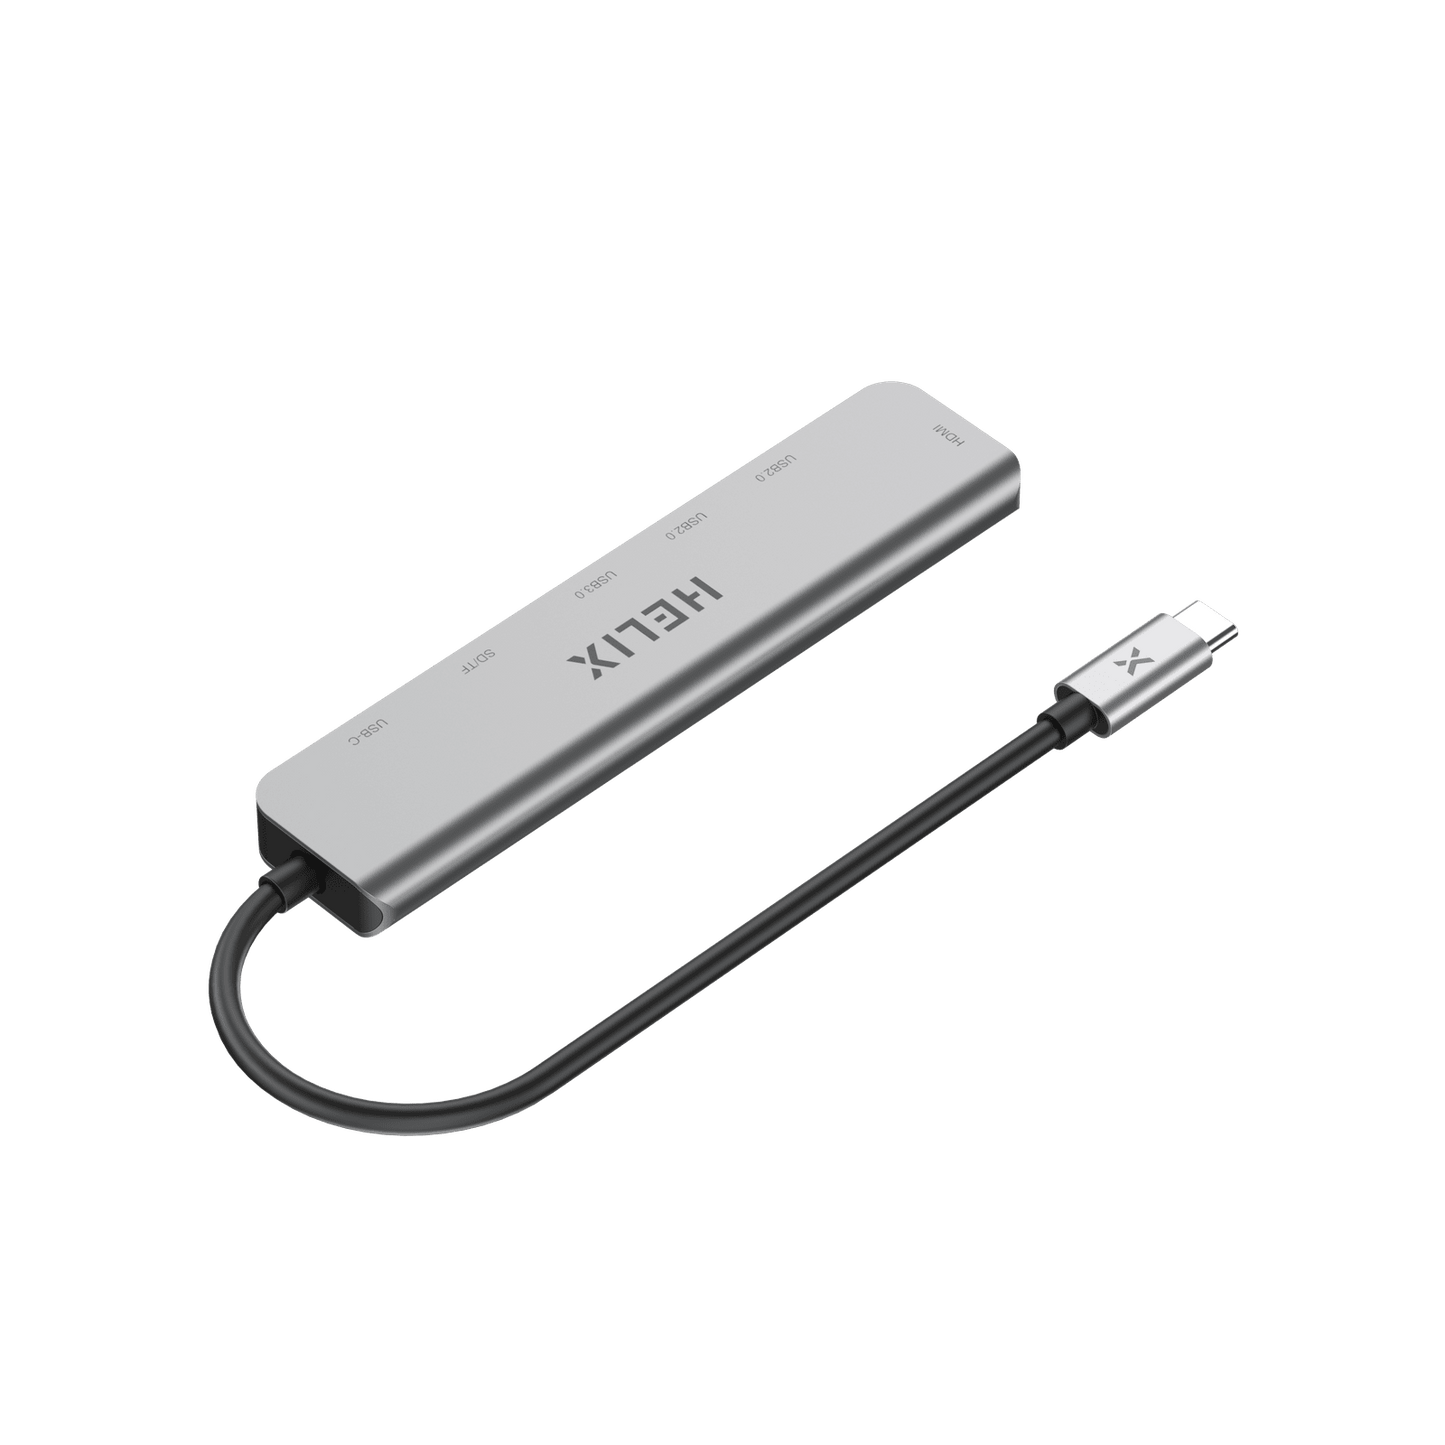 HELIX 7-IN-1 100W PD USB-C HUB With USB 3.0, 4K HDMI, Aluminum ProtectHELIX 7-IN-1 100W PD USB-C HUB With USB 3.0, 4K HDMI, Aluminum Protective Shell - HELIHUB-7 - Comprehensive Connectivity:A versatile hub offering seven ports for enhUSB HUBHELIXHELIX